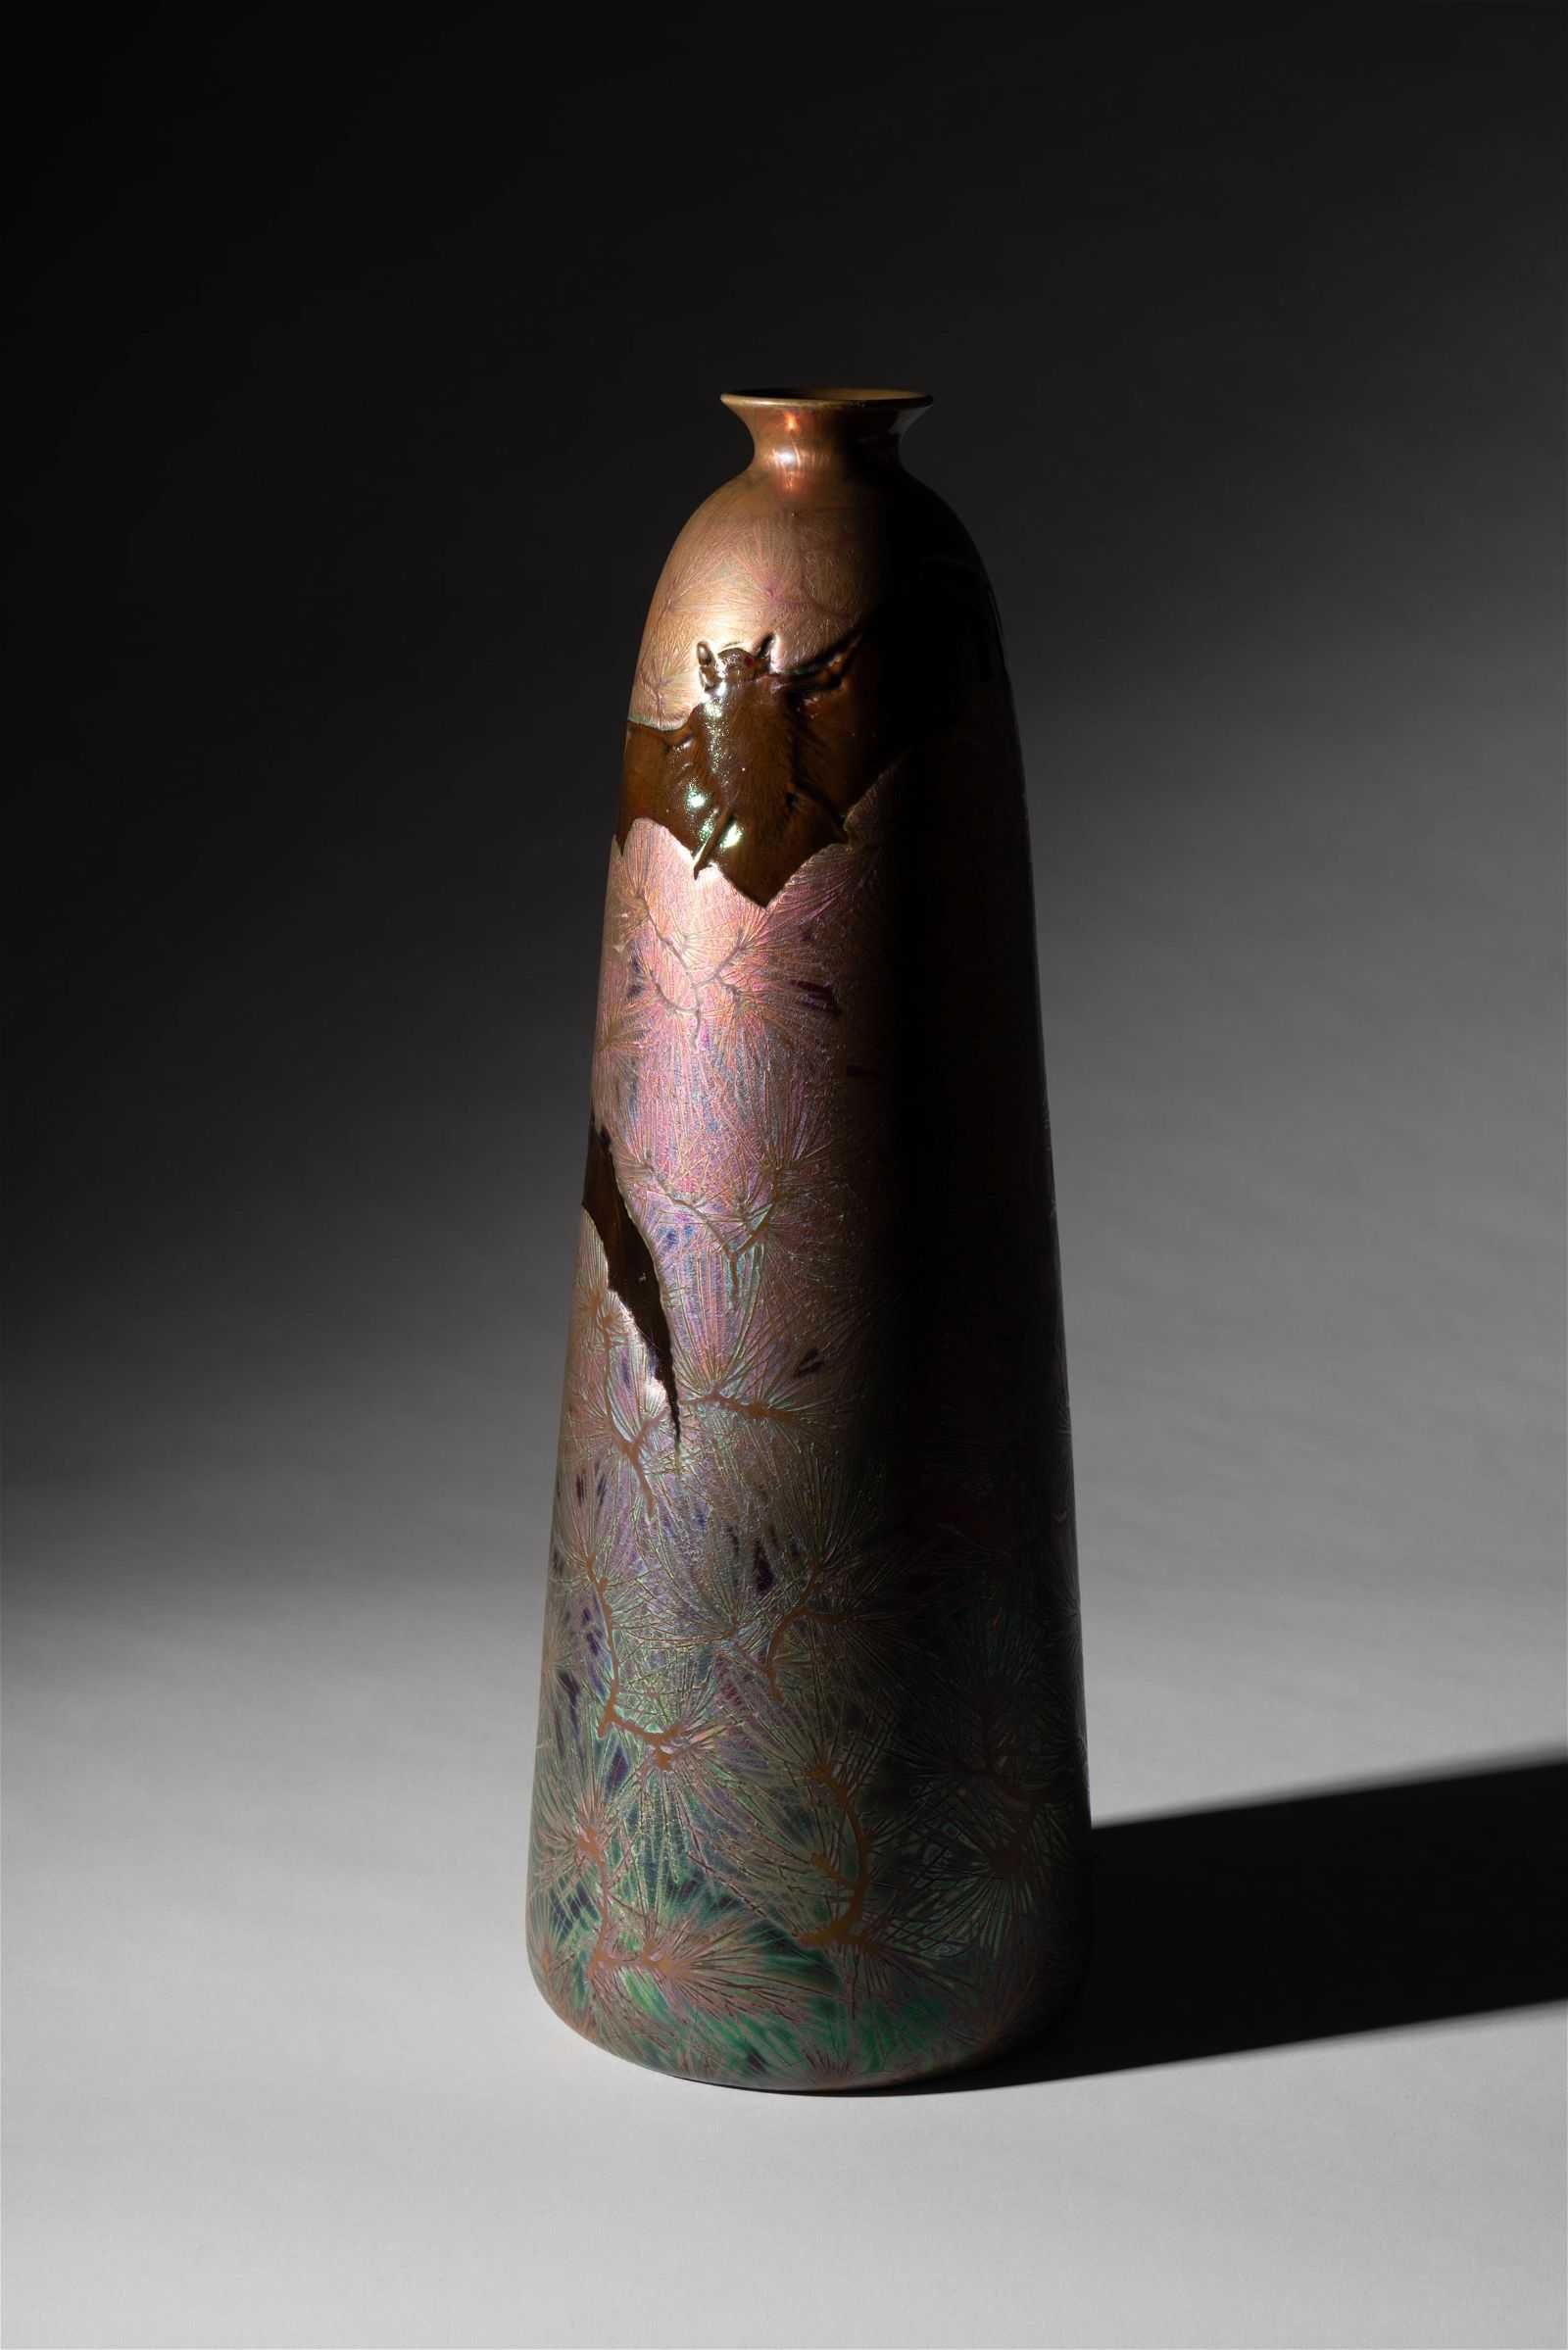 Clement Massier Art Nouveau vase, which sold for $20,480 with buyer’s premium at Abell Auction on April 17.